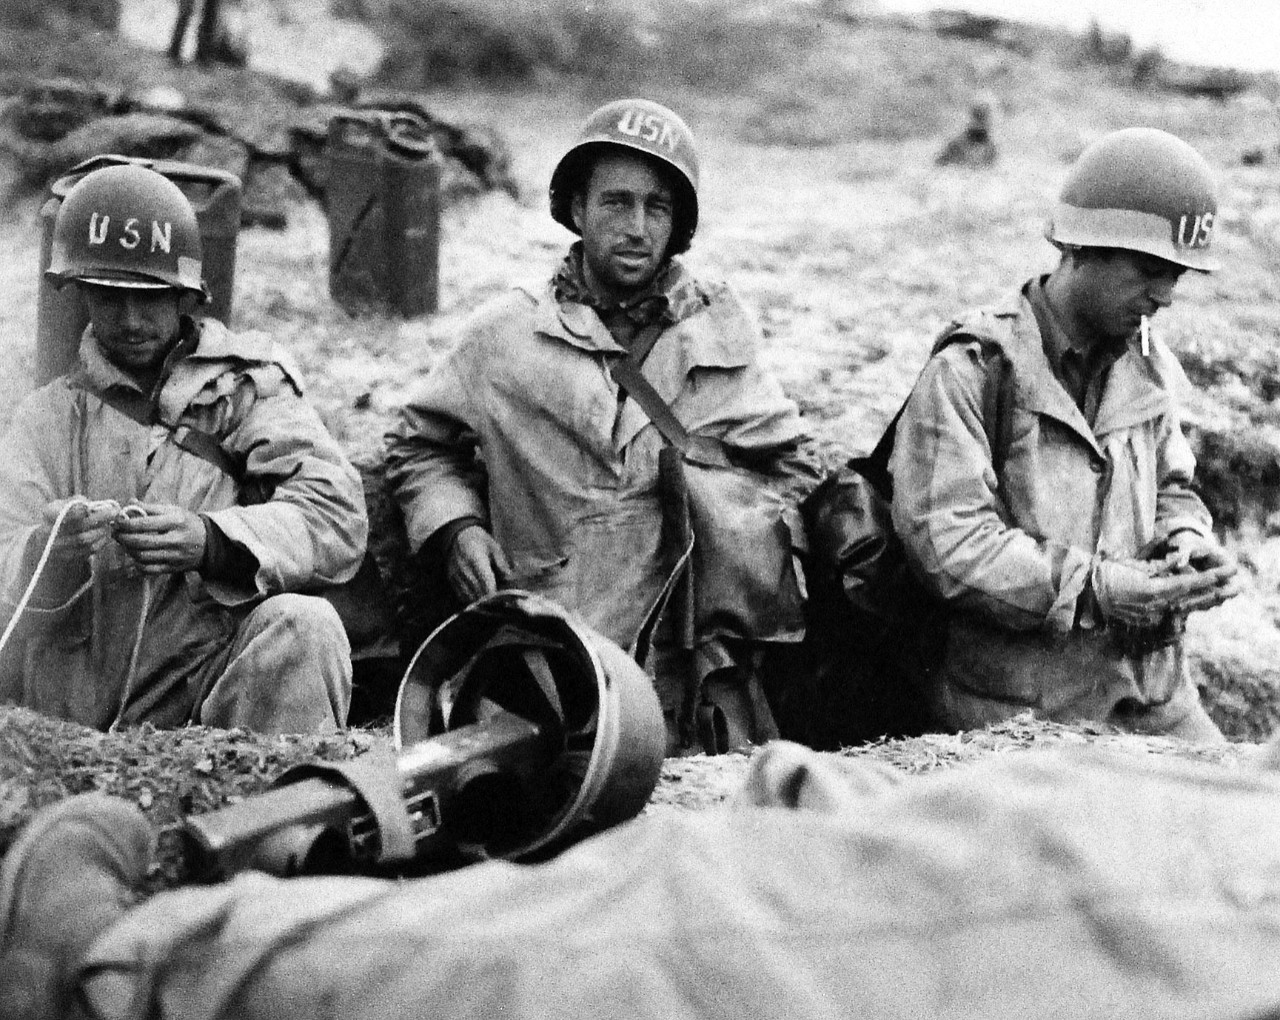 80-G-252732:  Normandy Invasion, Utah Beach, June 1944. Members of the U.S. Navy 2nd Beach Battalion catch a “breather” at their new “home” on the French beach, after hot action on beachhead.  Note, the walkie-talkie in the foreground.  Photograph released 11 June 1944.   Official U.S. Navy Photograph, now in the collections of the National Archives.   (2014/10/28). 